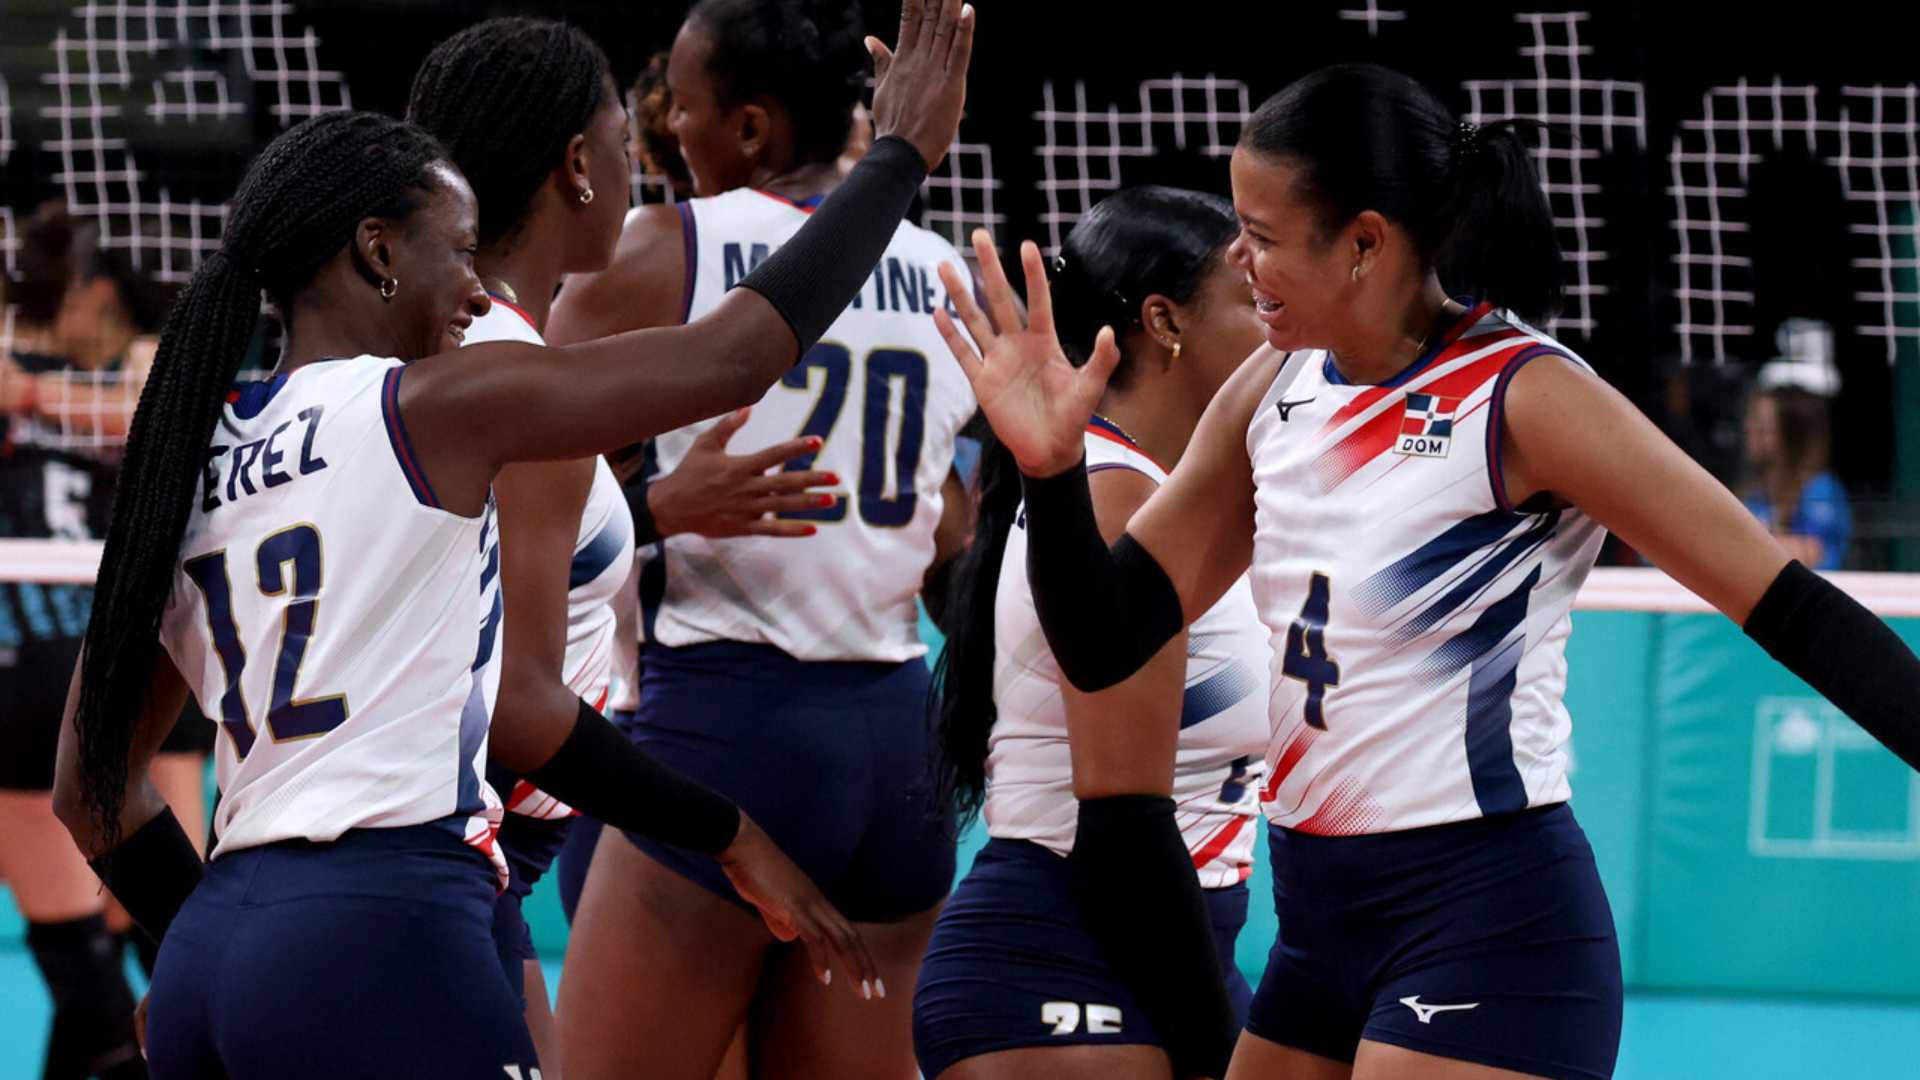 Volleyball: Dominican Republic aims for Pan American gold